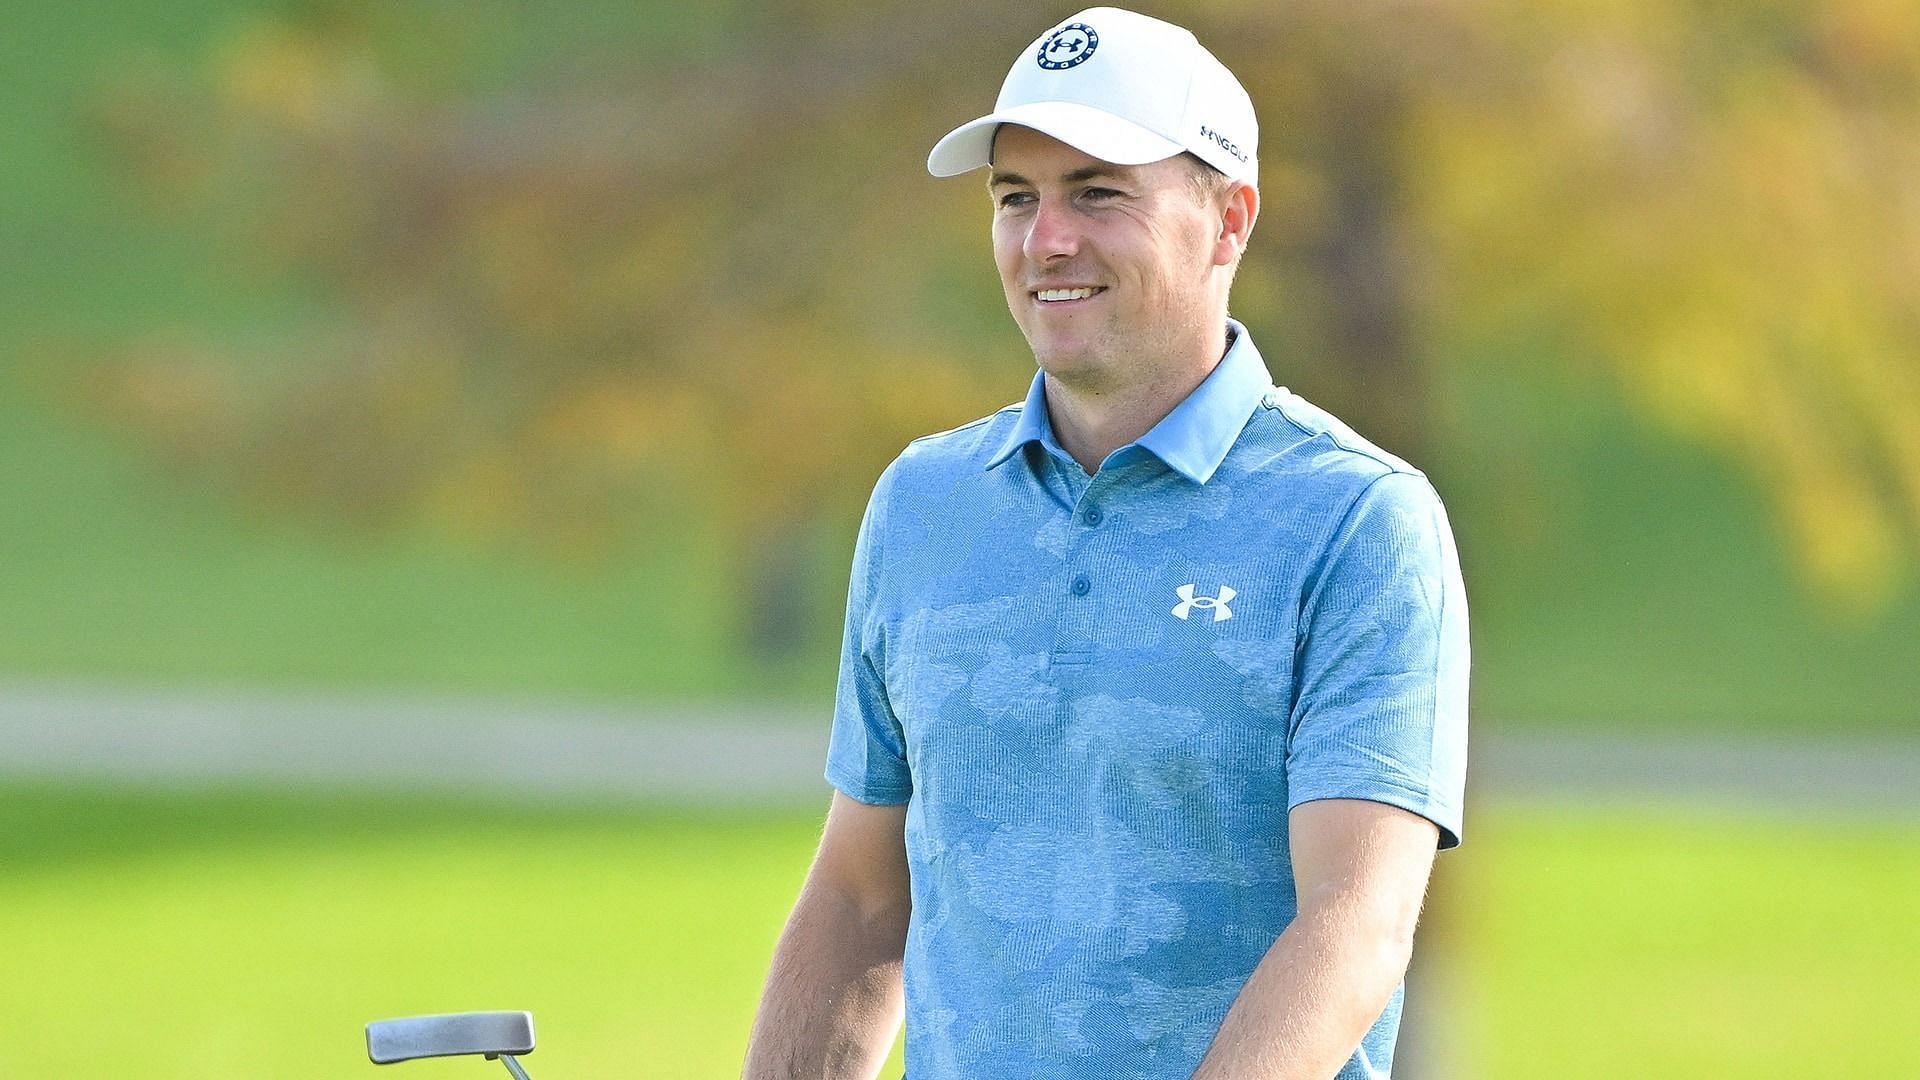 “That's tough” Jordan Spieth on the challenges of adding new